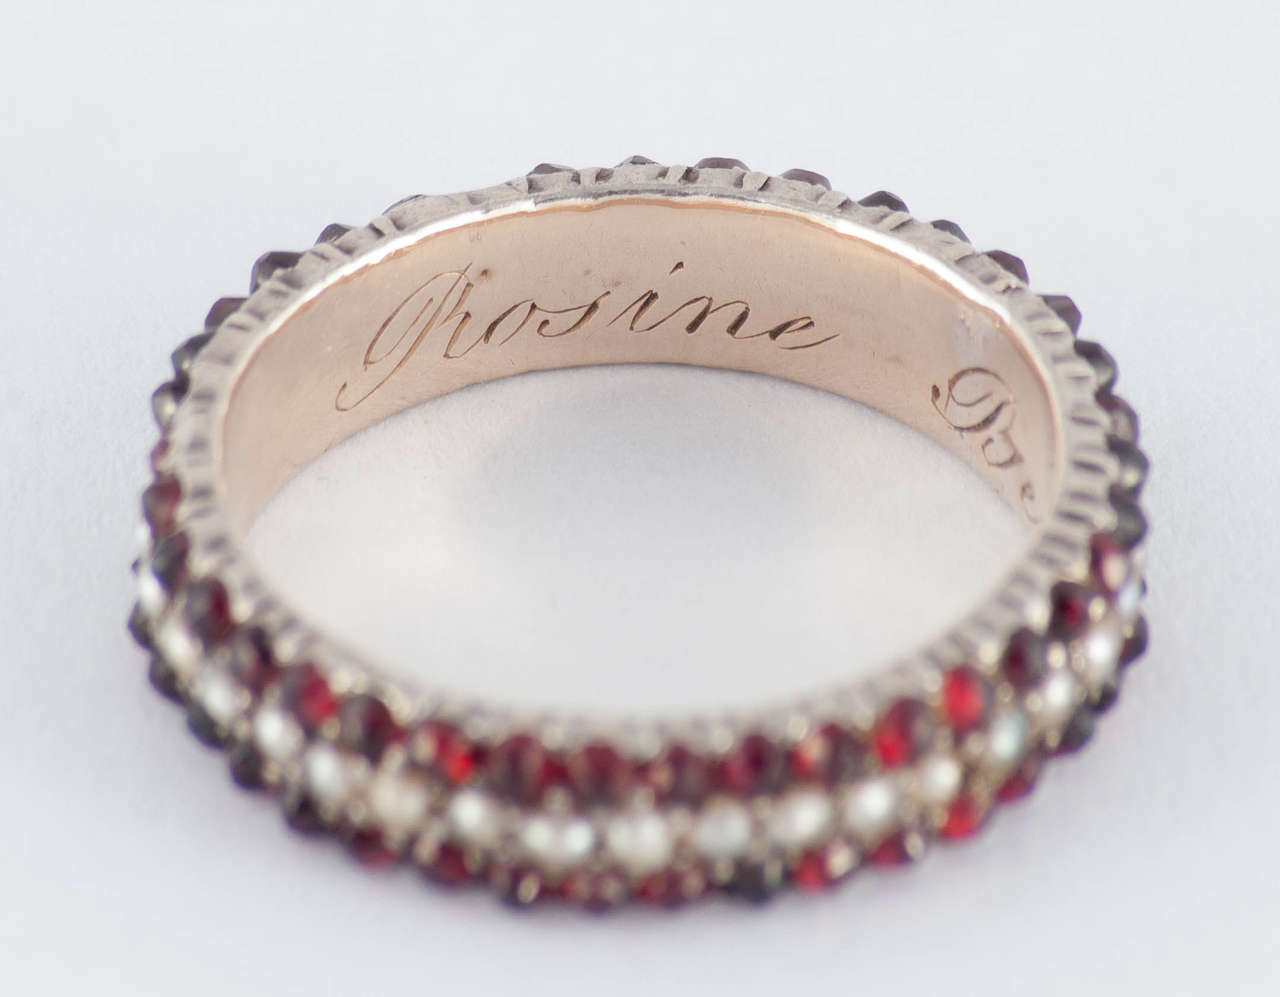 Lovely early Victorian gold and silver eternity band set with garnets and pearls. The interior is engraved with the owners name, Rosine Bennet. The ring is a size 8 and measures 3/16 in width.